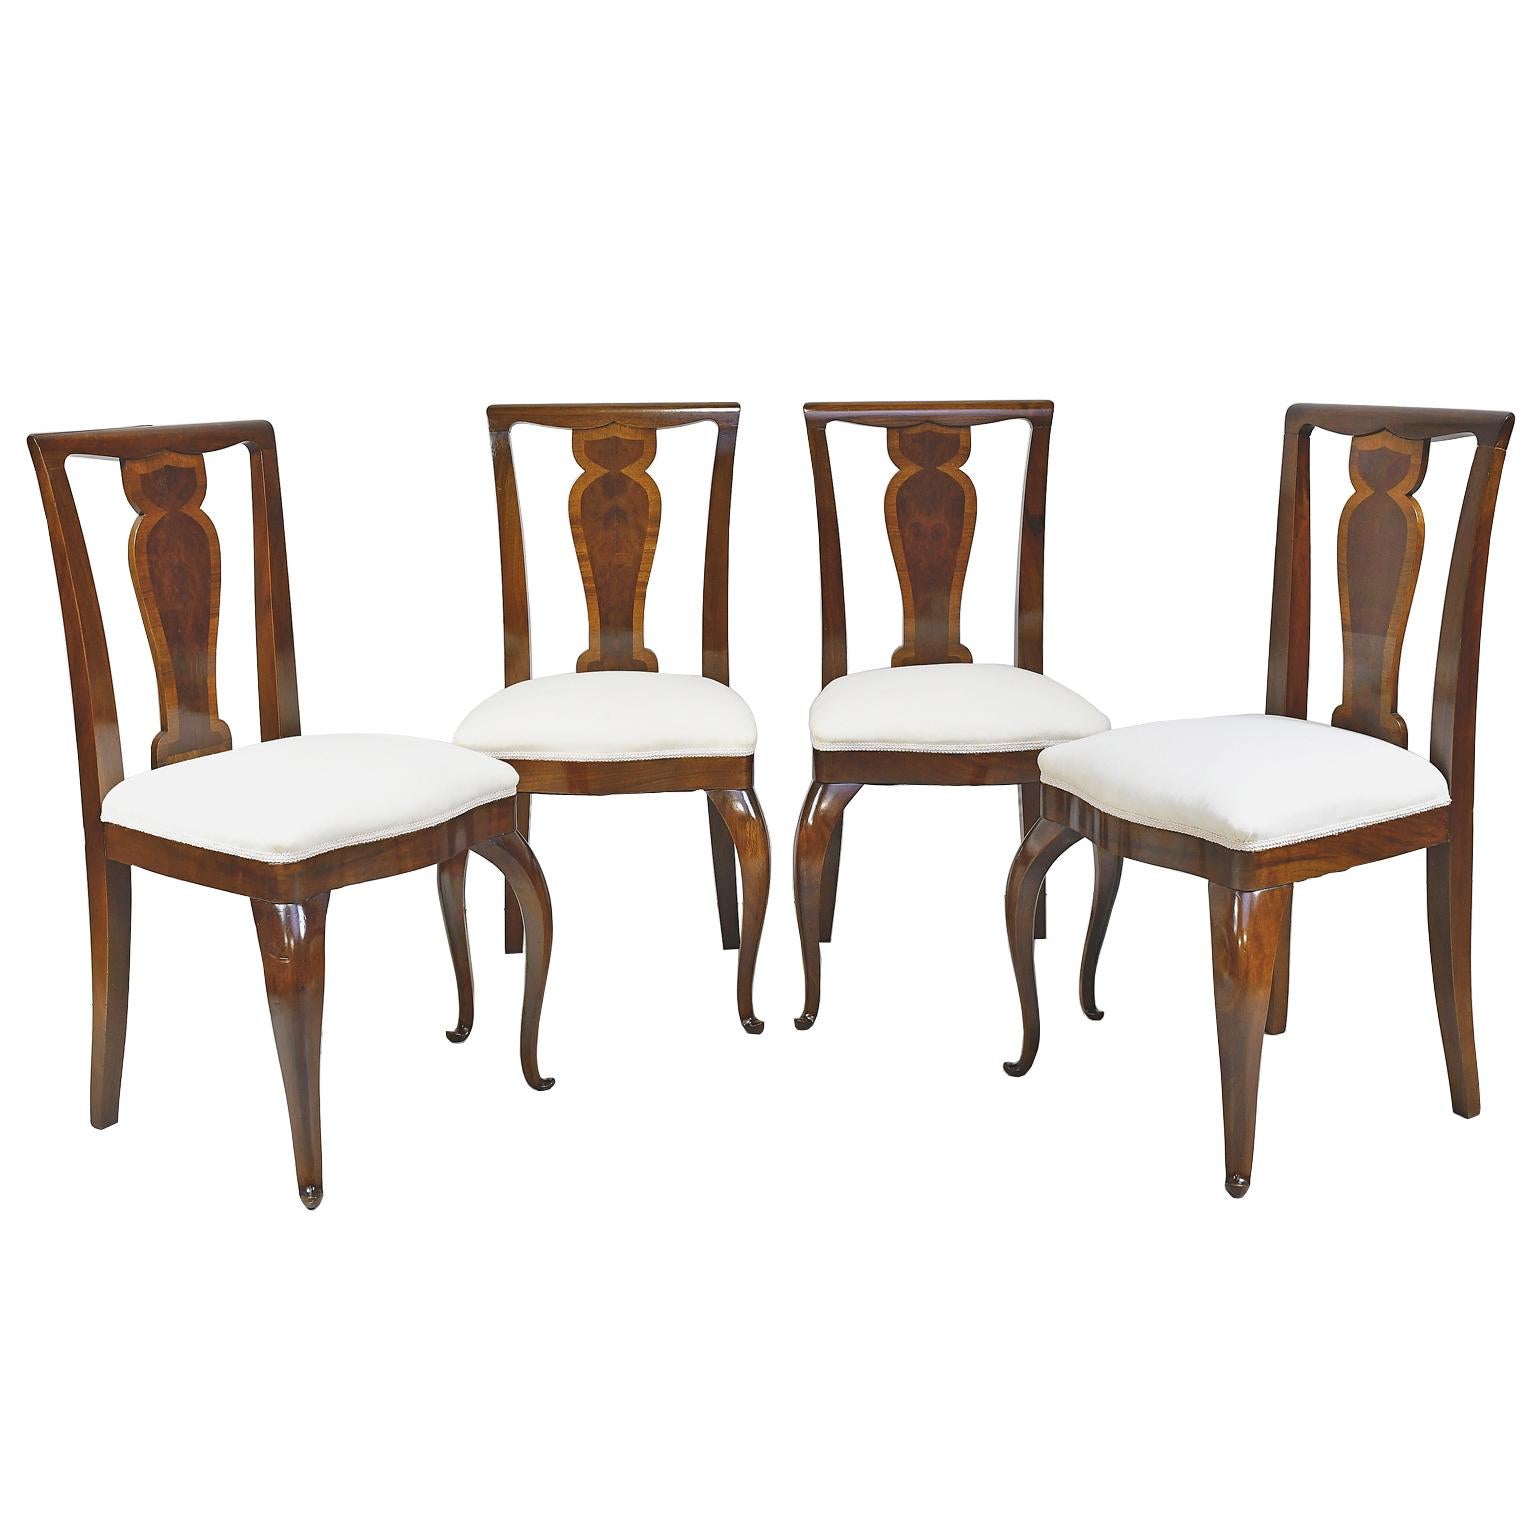 Polished Set of 4 Mahogany and Walnut French Art Deco Dining Chairs, circa 1910-1920